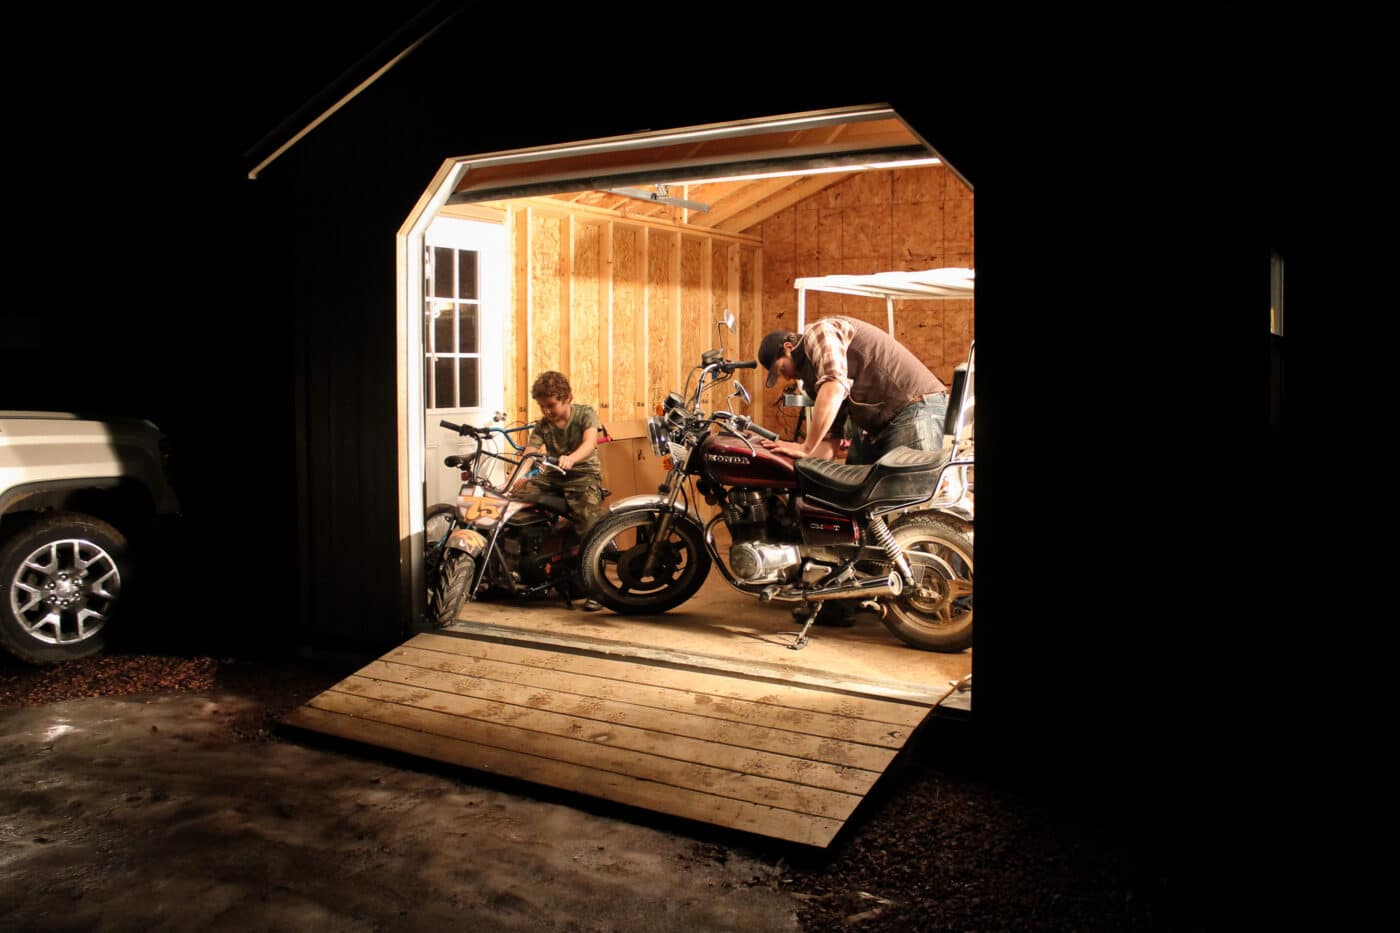 Man and boy working on motorcycle in detached A-Frame Garage